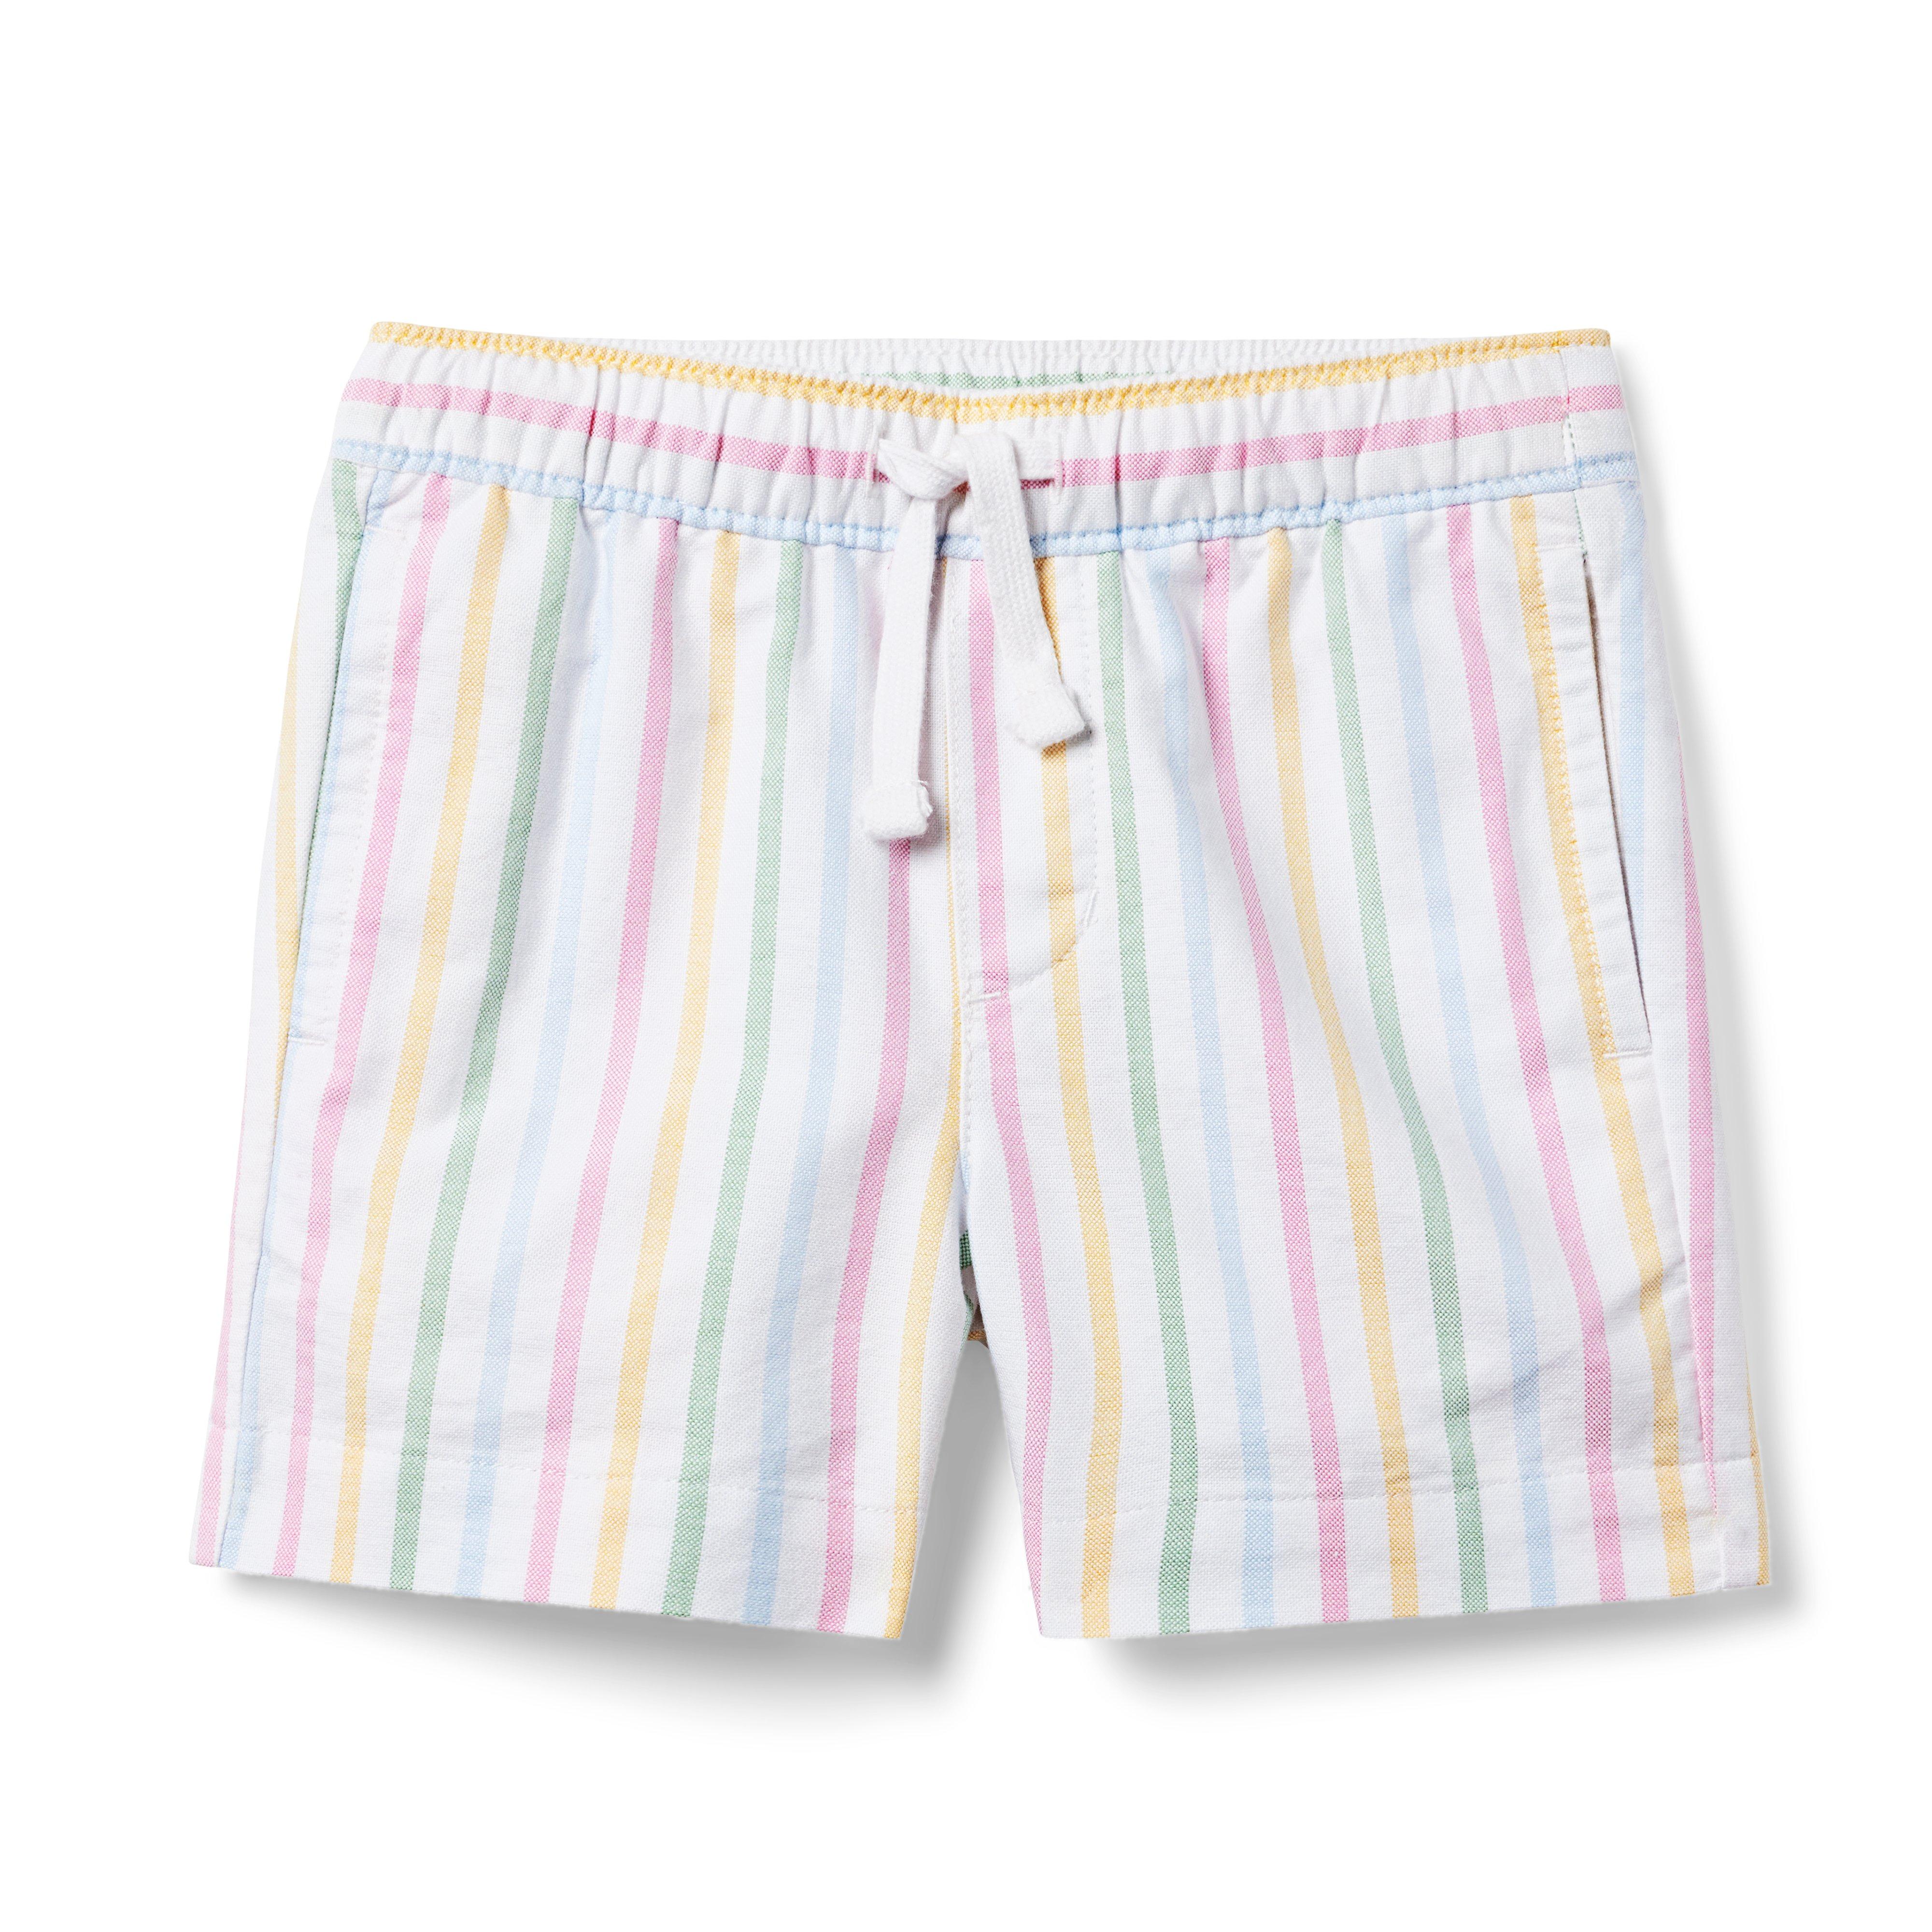 Striped Oxford Pull-On Short